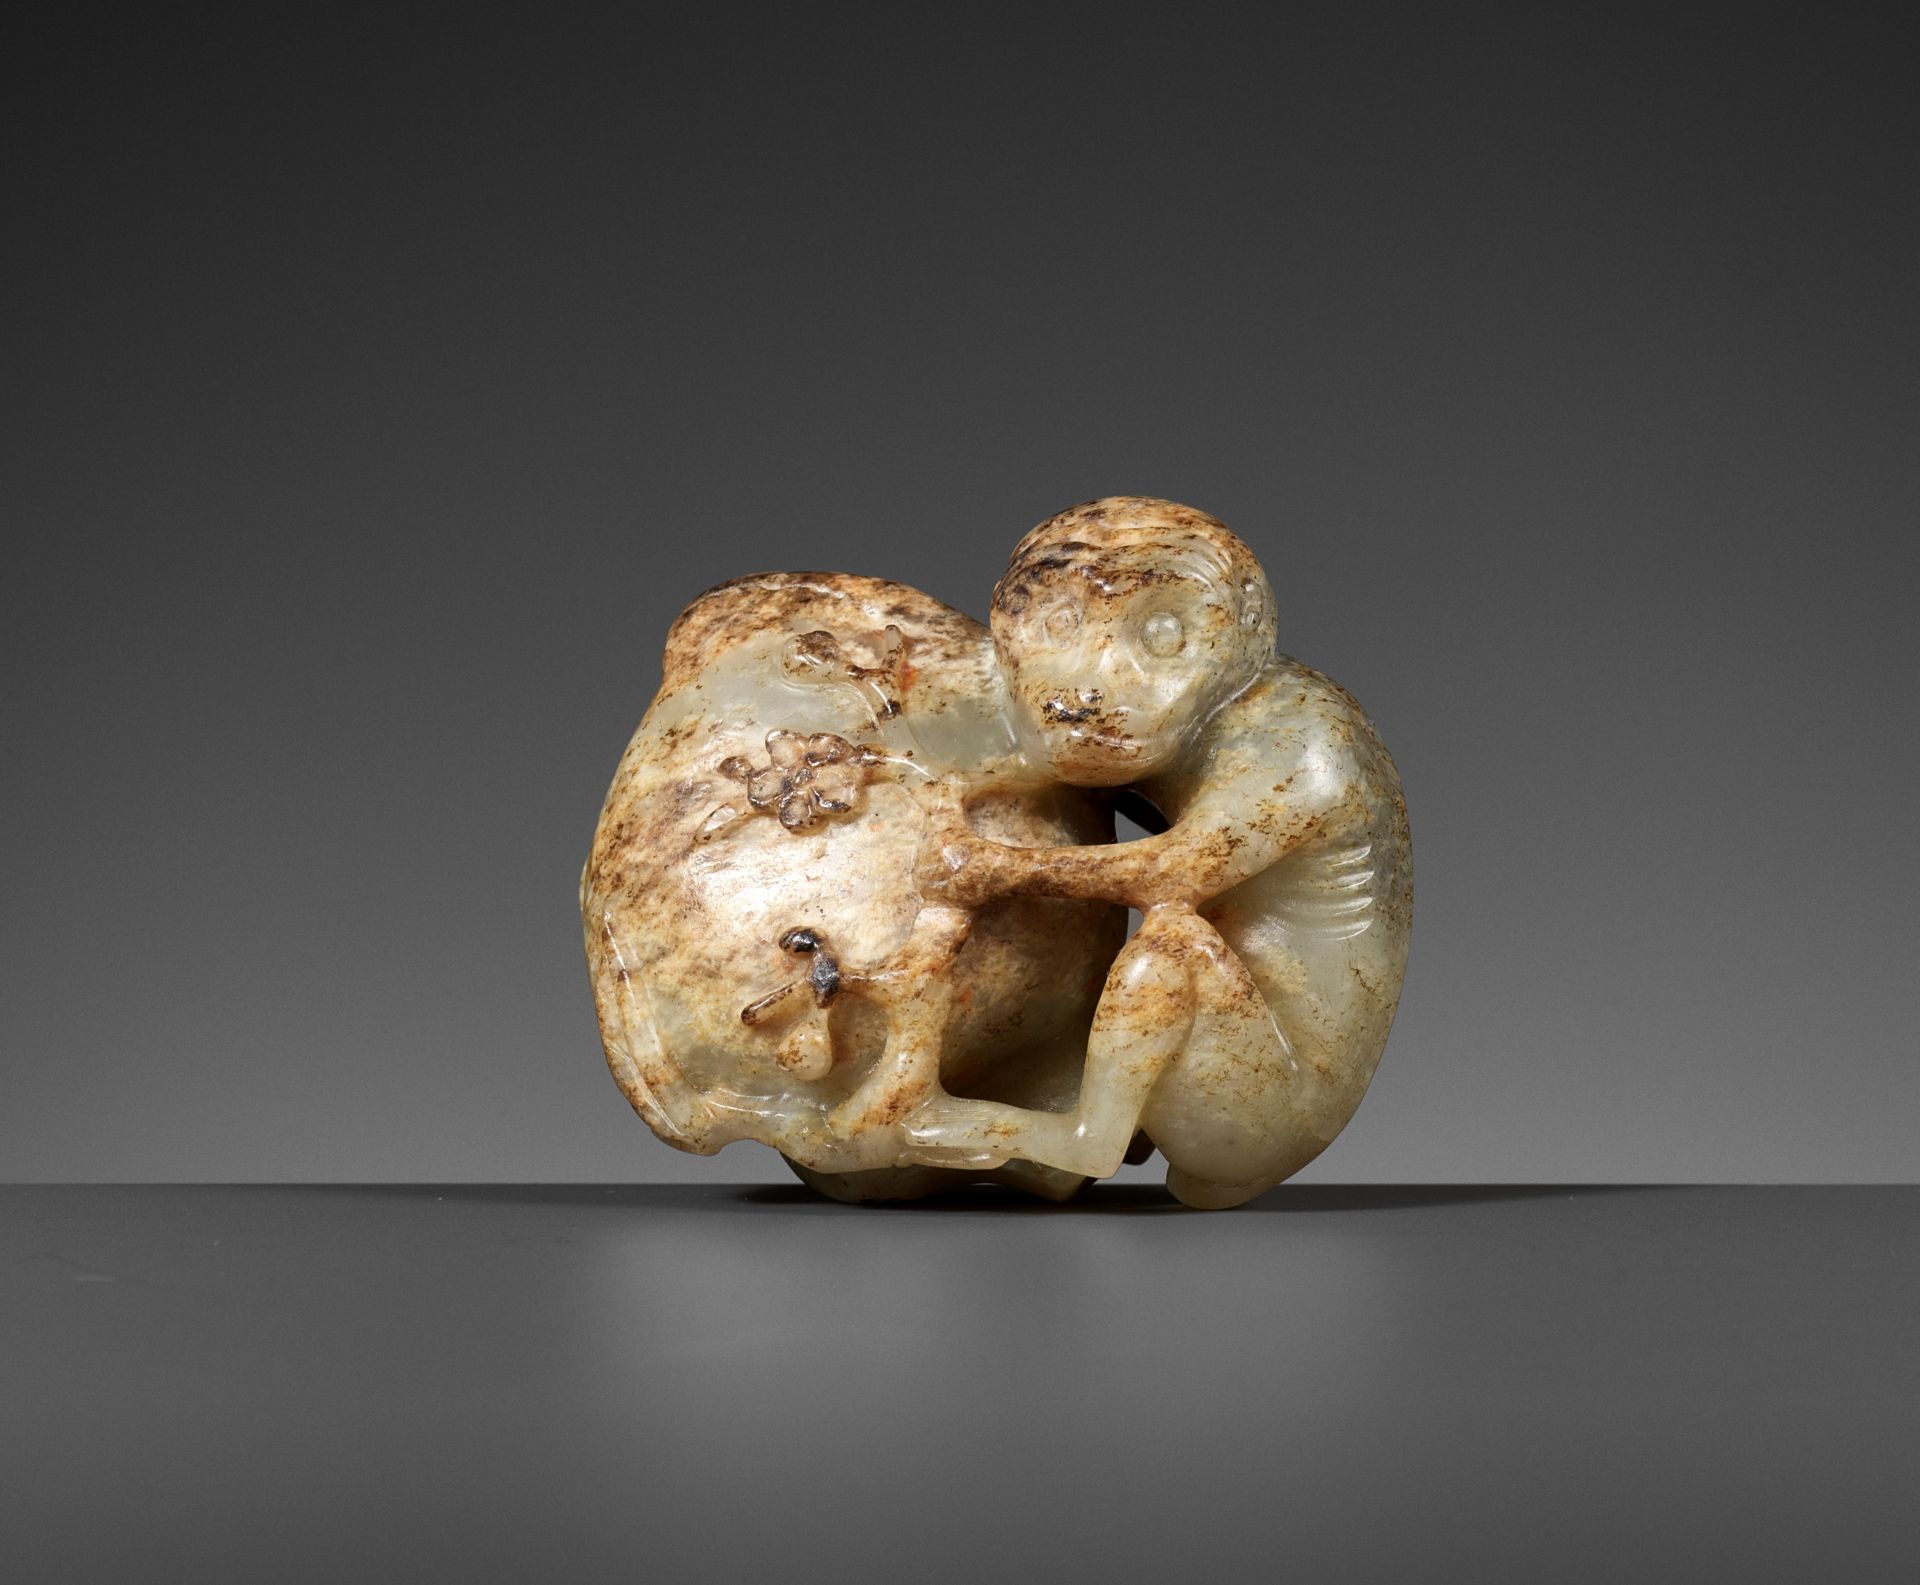 A MOTTLED PALE CELADON JADE 'MONKEY AND PEACH' FIGURE, 17TH - 18TH CENTURY